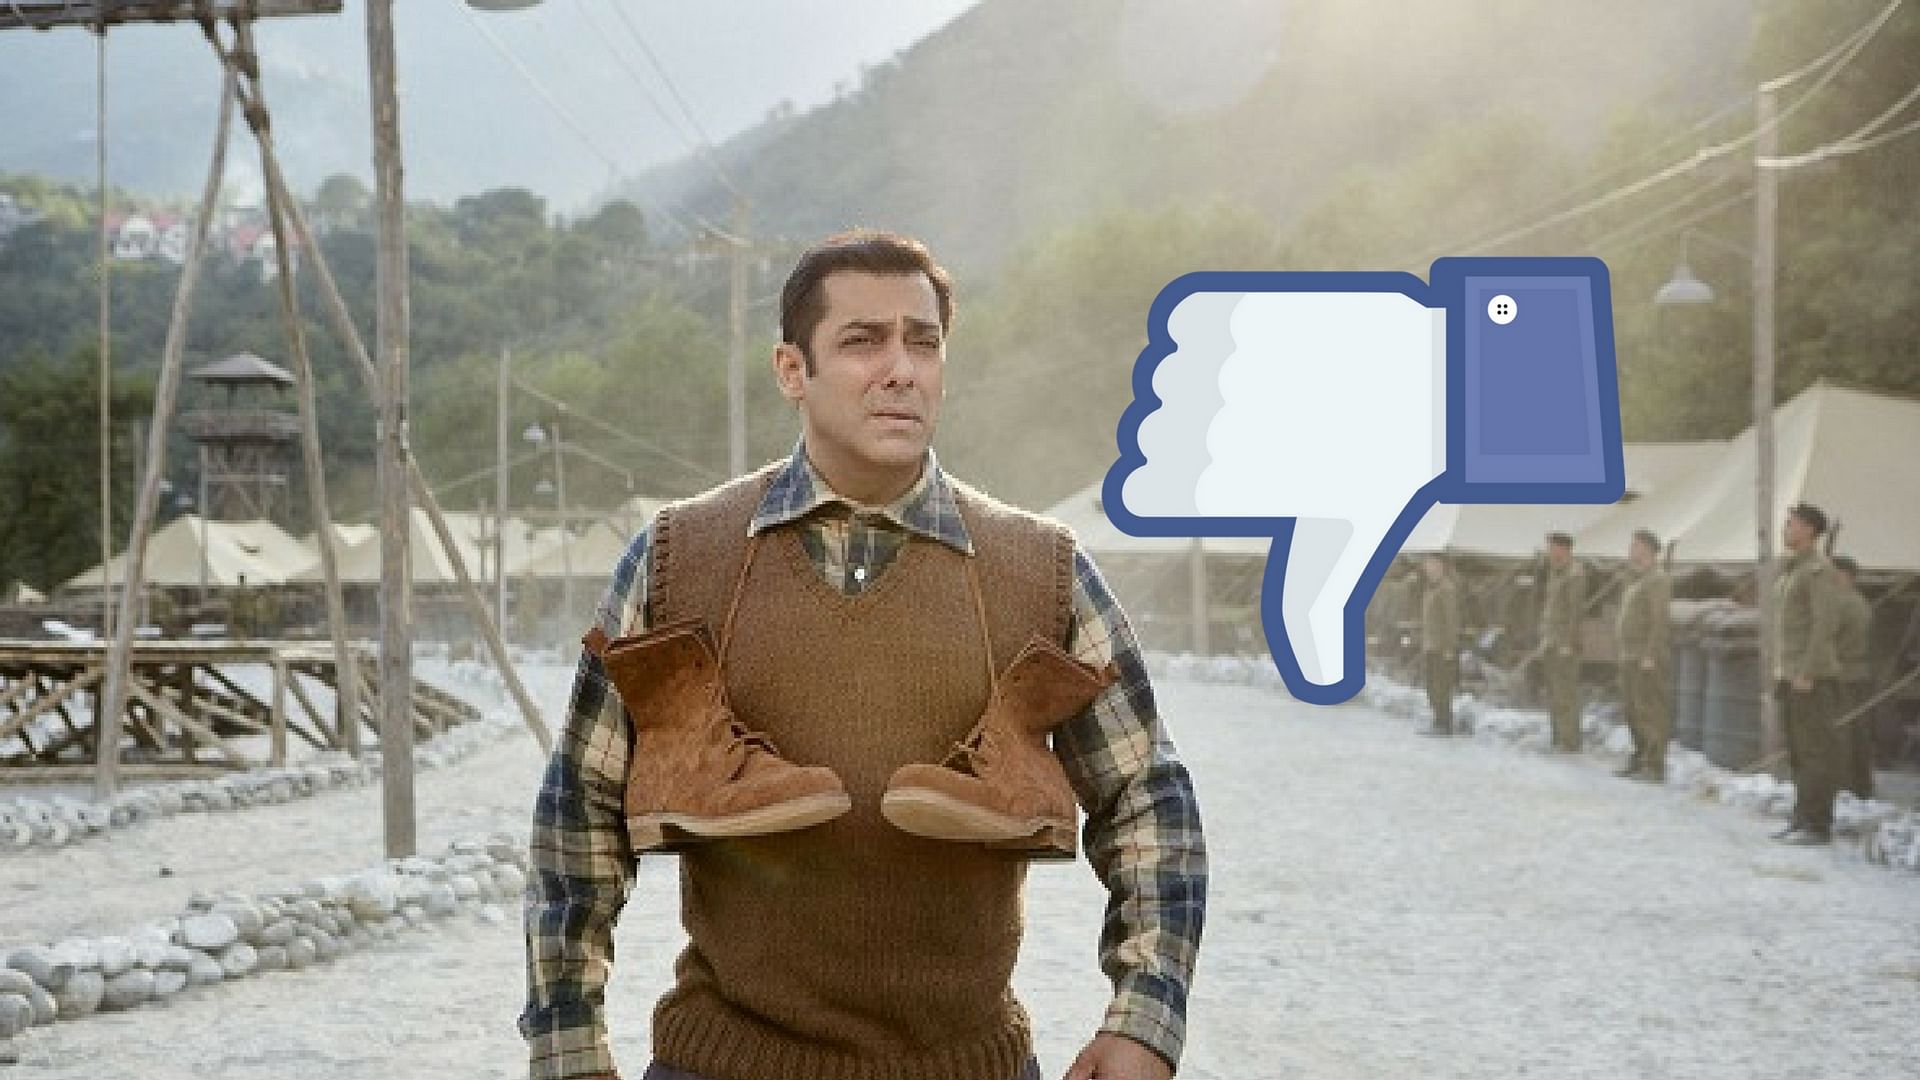 

Salman Khan’s <i>Tubelight </i>was rejected by critics and his regular fans.